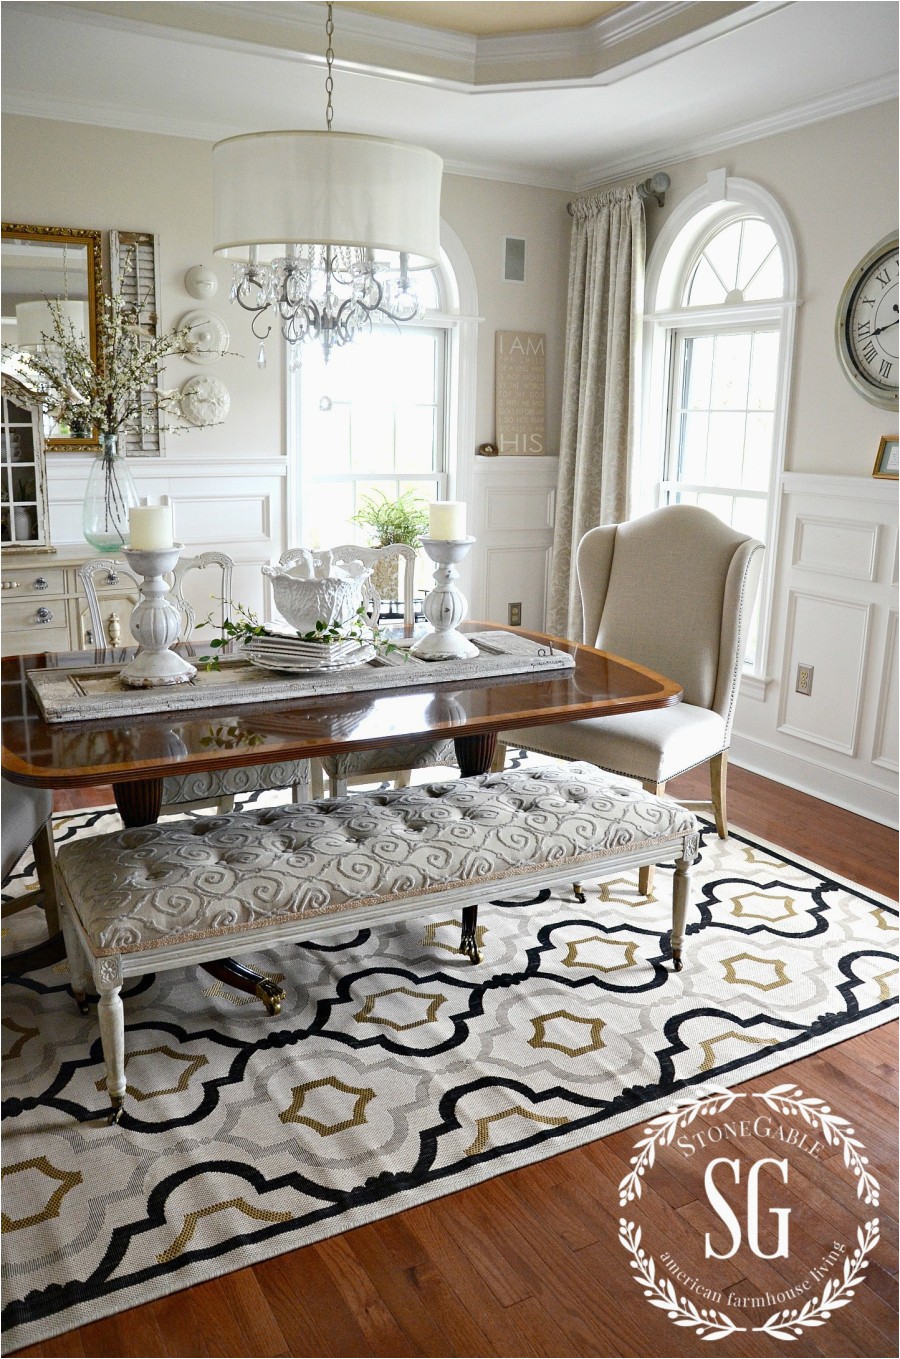 7×7 area Rugs for Dining Room 5 Rules for Choosing the Perfect Dining Room Rug Stonegable